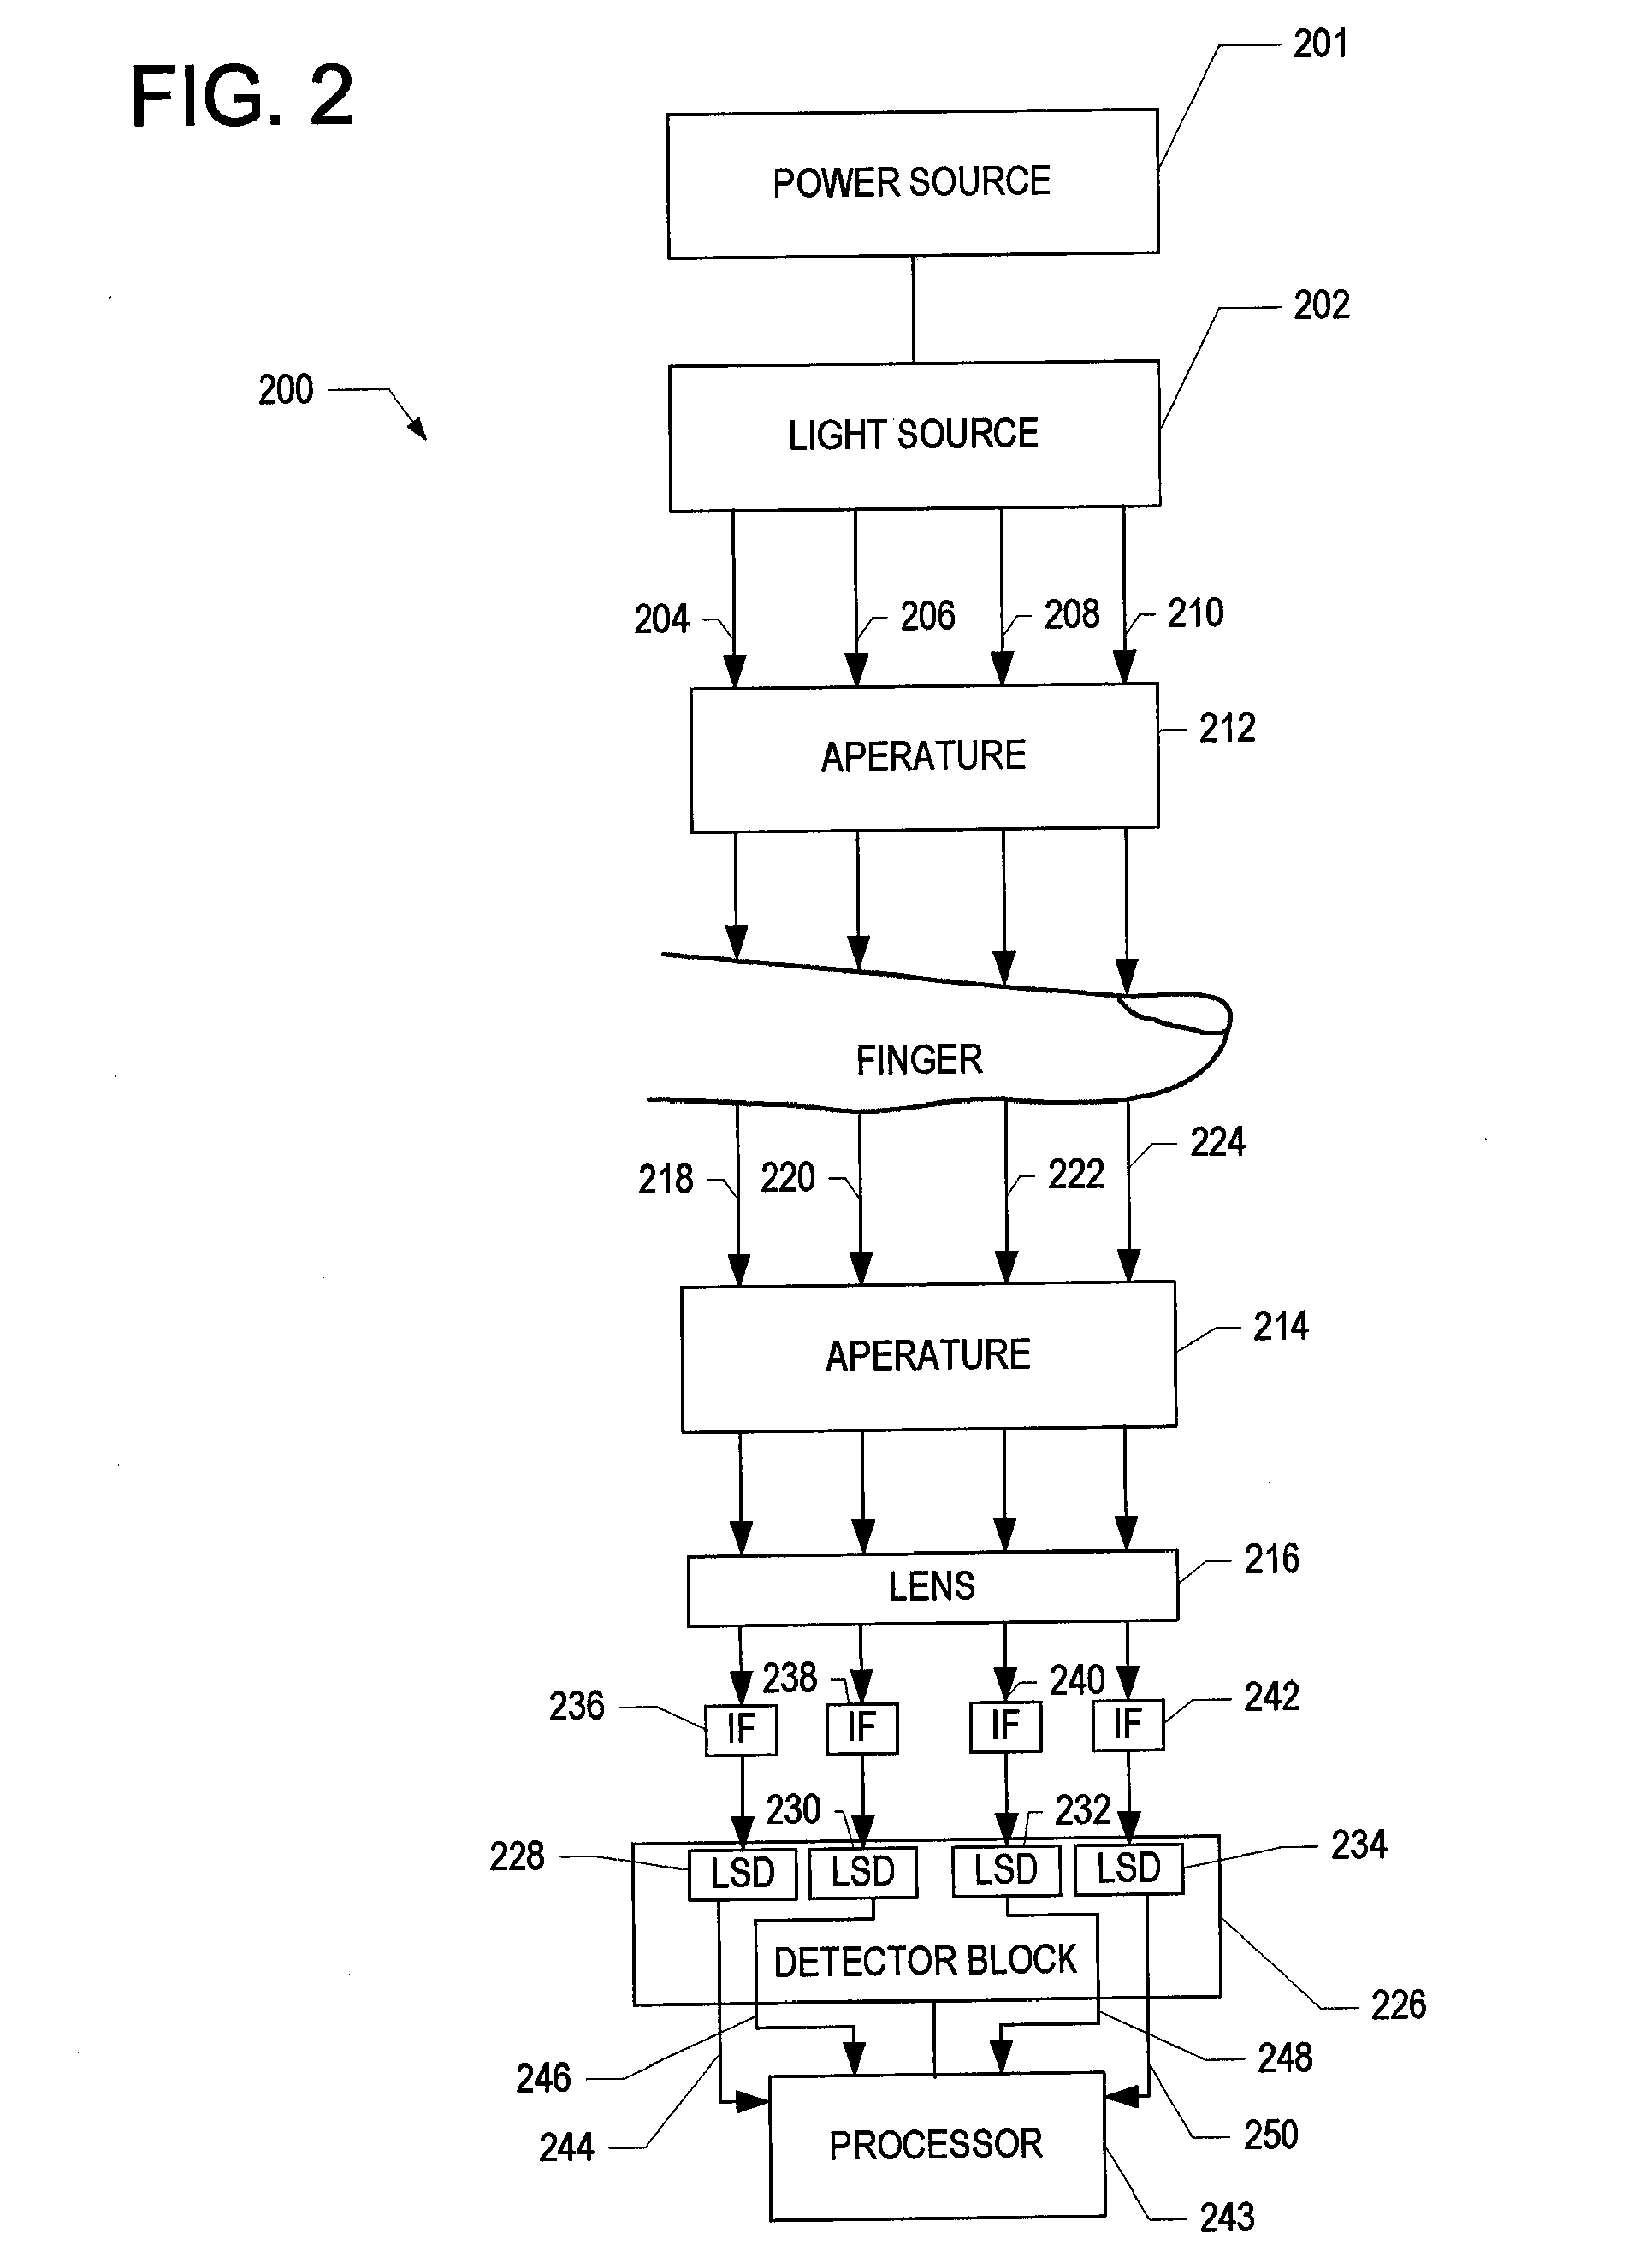 Optical spectroscopy device for non-invasive blood glucose detection and associated method of use